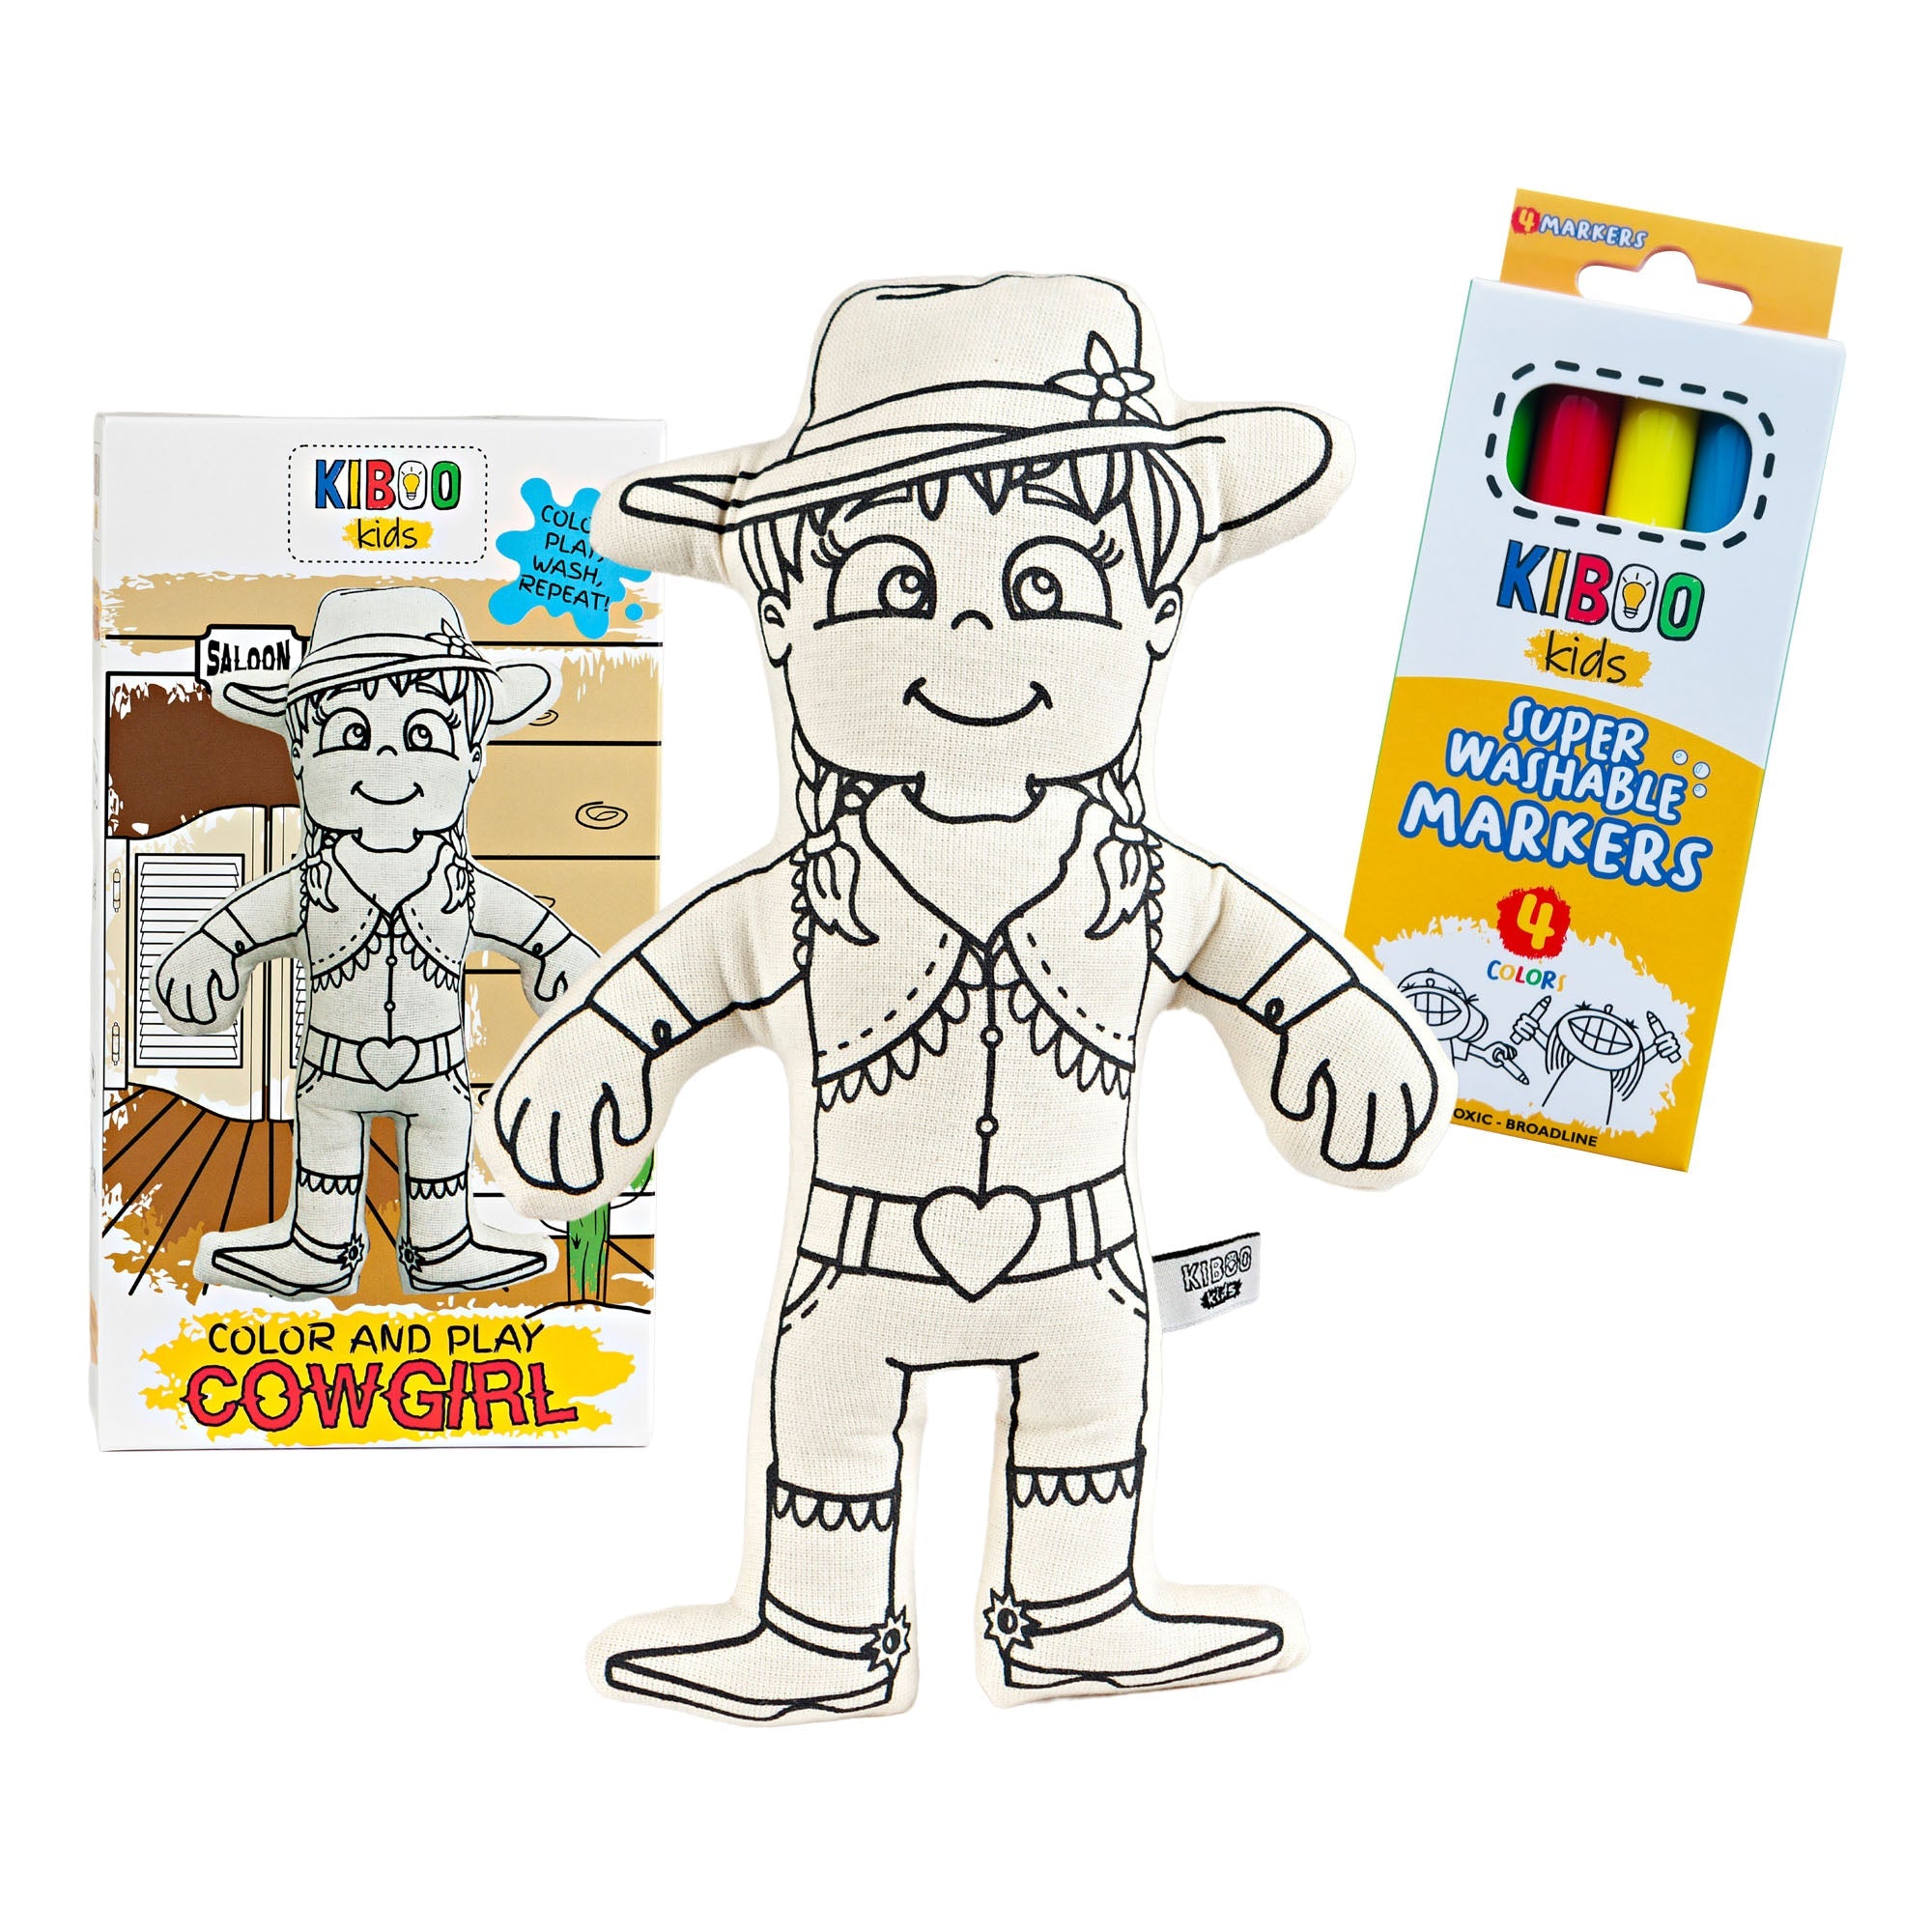 Color And Play Doll - Cowgirl